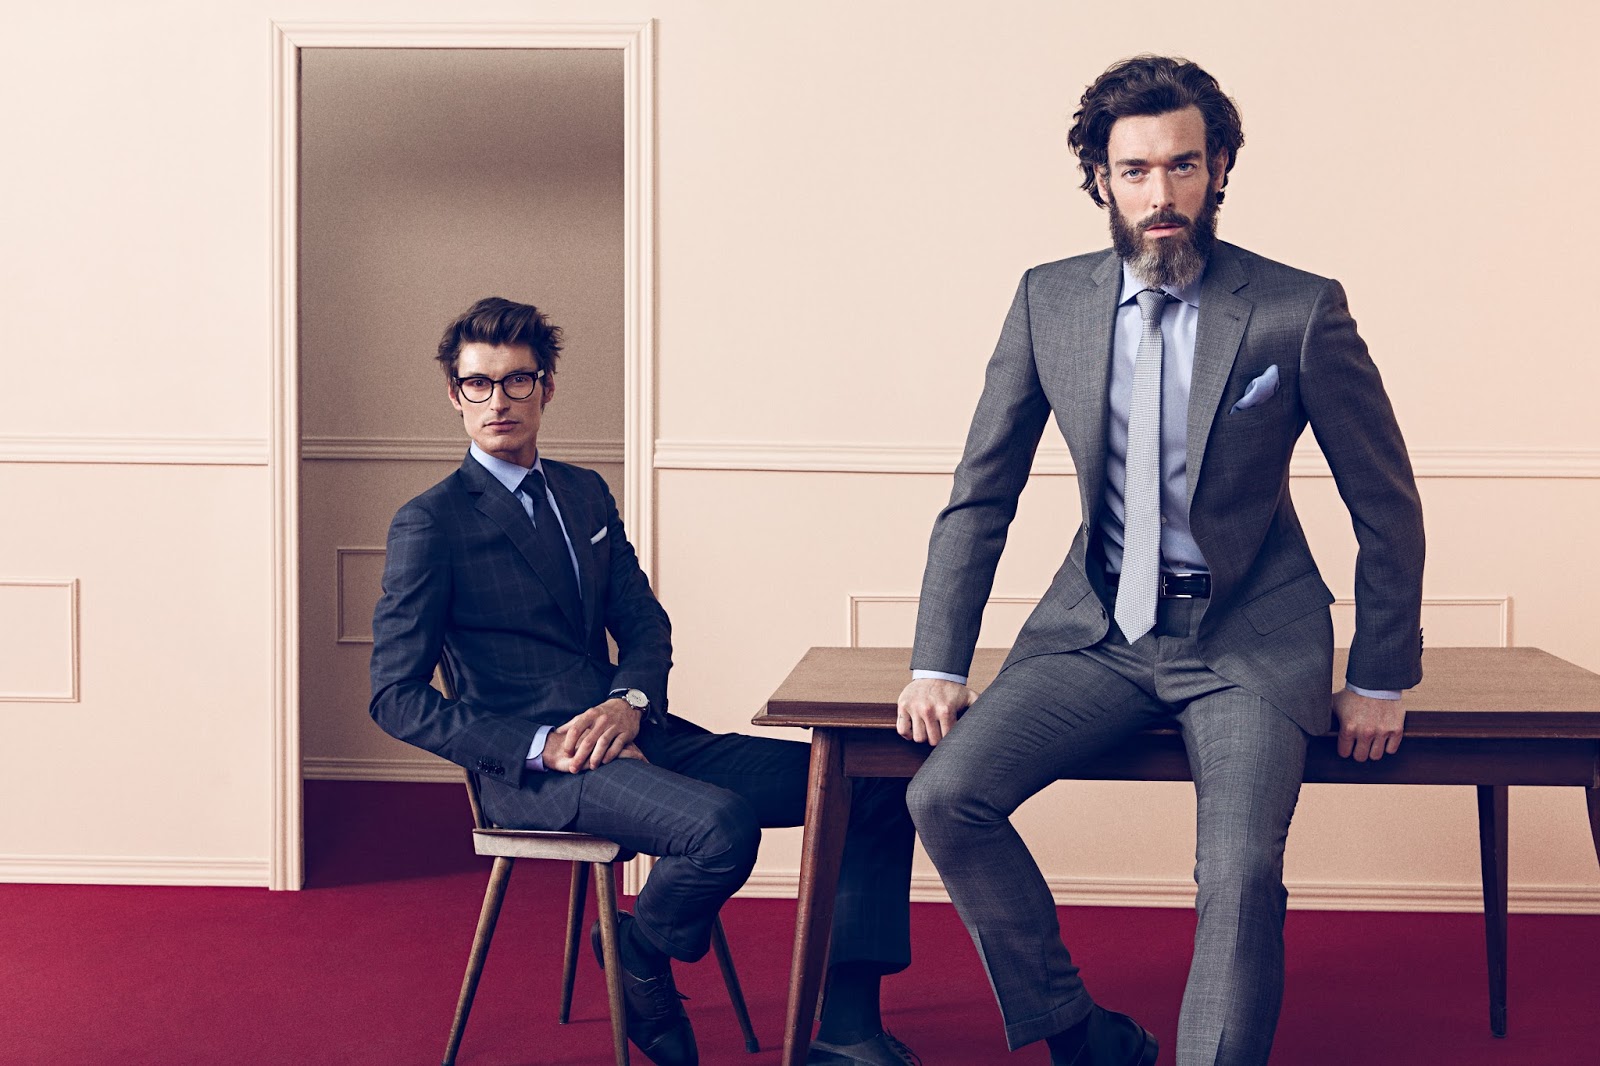 Richard Biedul + Pablo Pietro are Dressed to Impress for Mansolutely